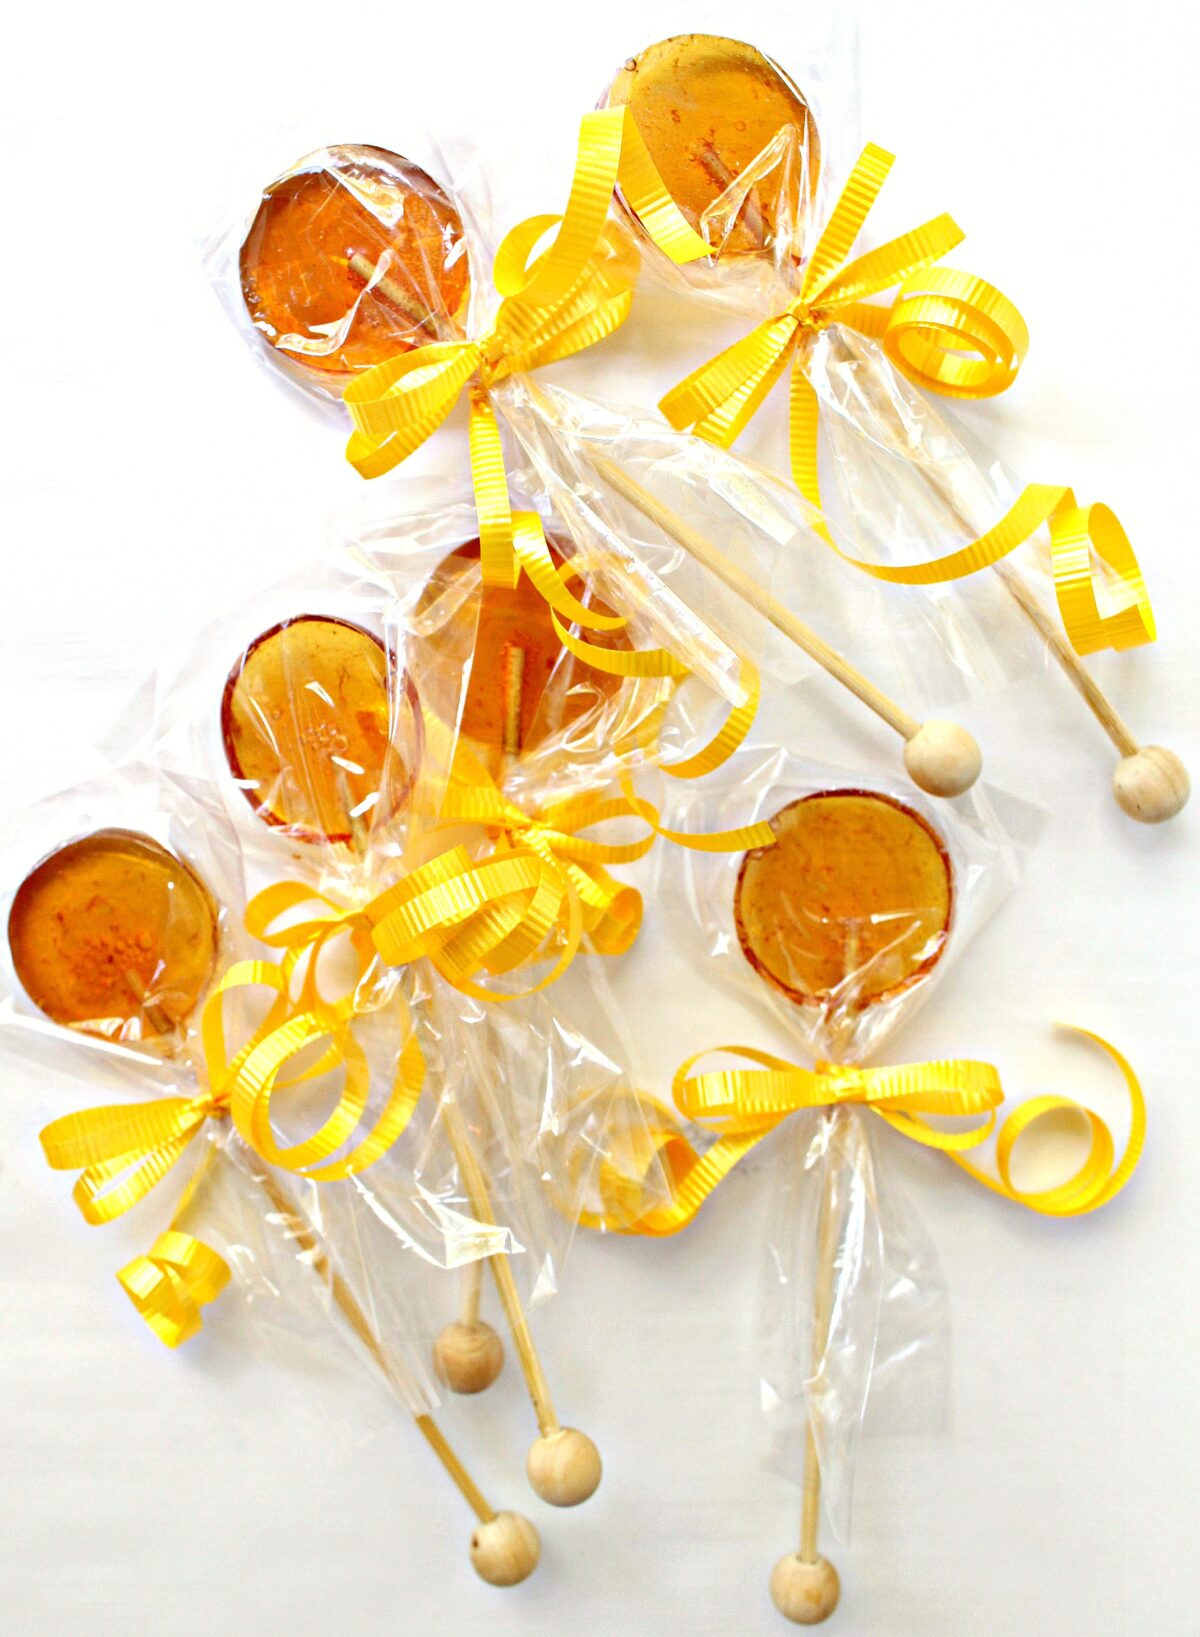 Honey Lollipops with cellophane bags over the candy, tied with a yellow ribbon.